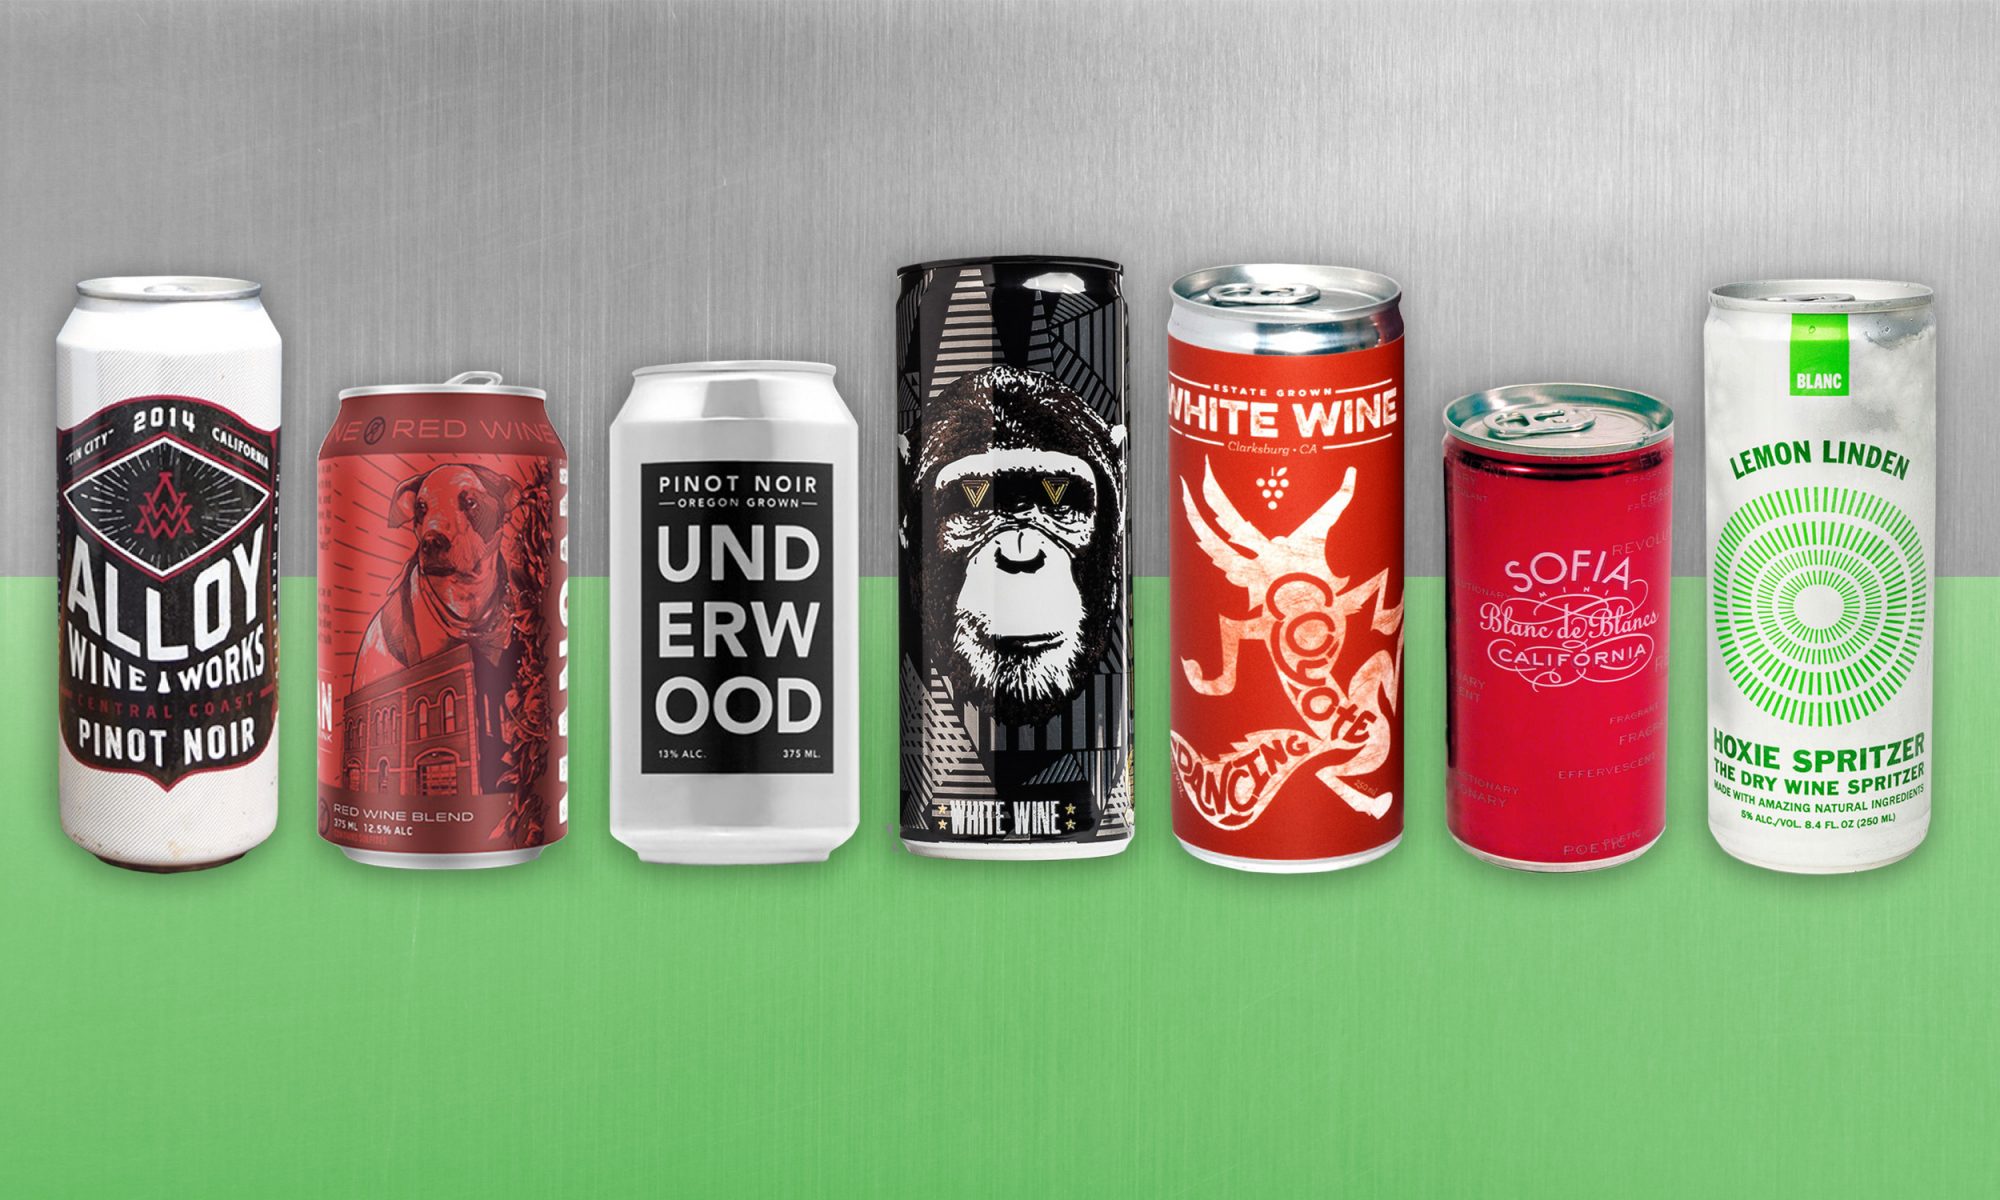 møde reparere brænde The Best and Worst Canned Wines for Public Drinking | MyRecipes